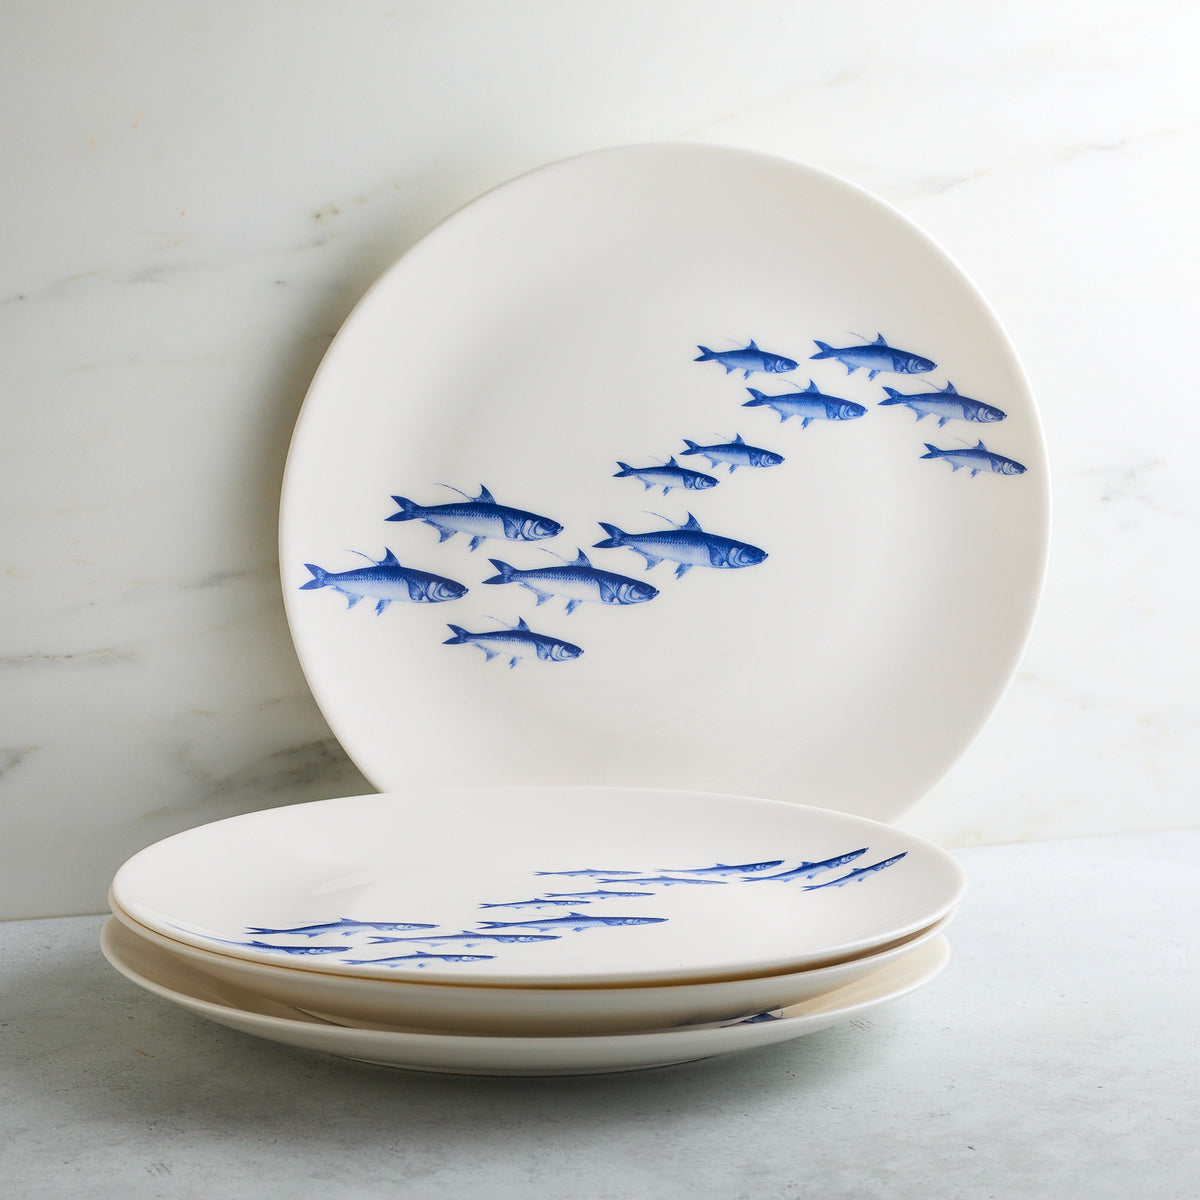 Two white Caskata Artisanal Home School of Fish Coupe Dinner Plates stacked against a marble background.